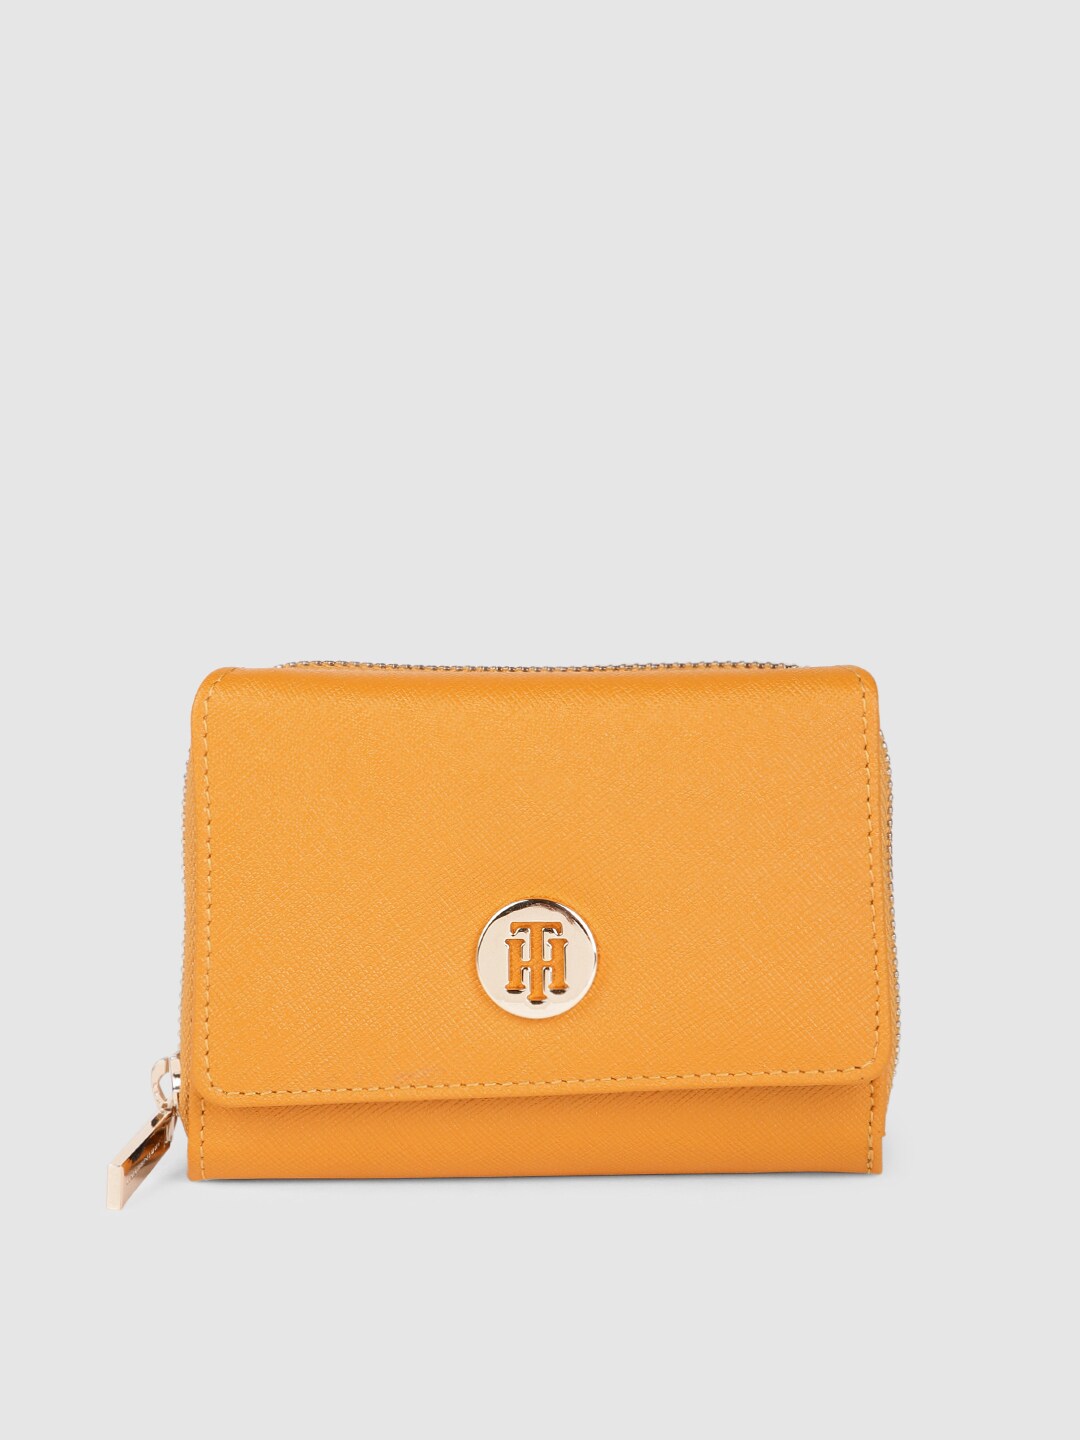 Tommy Hilfiger Women Yellow Leather Three Fold Wallet Price in India